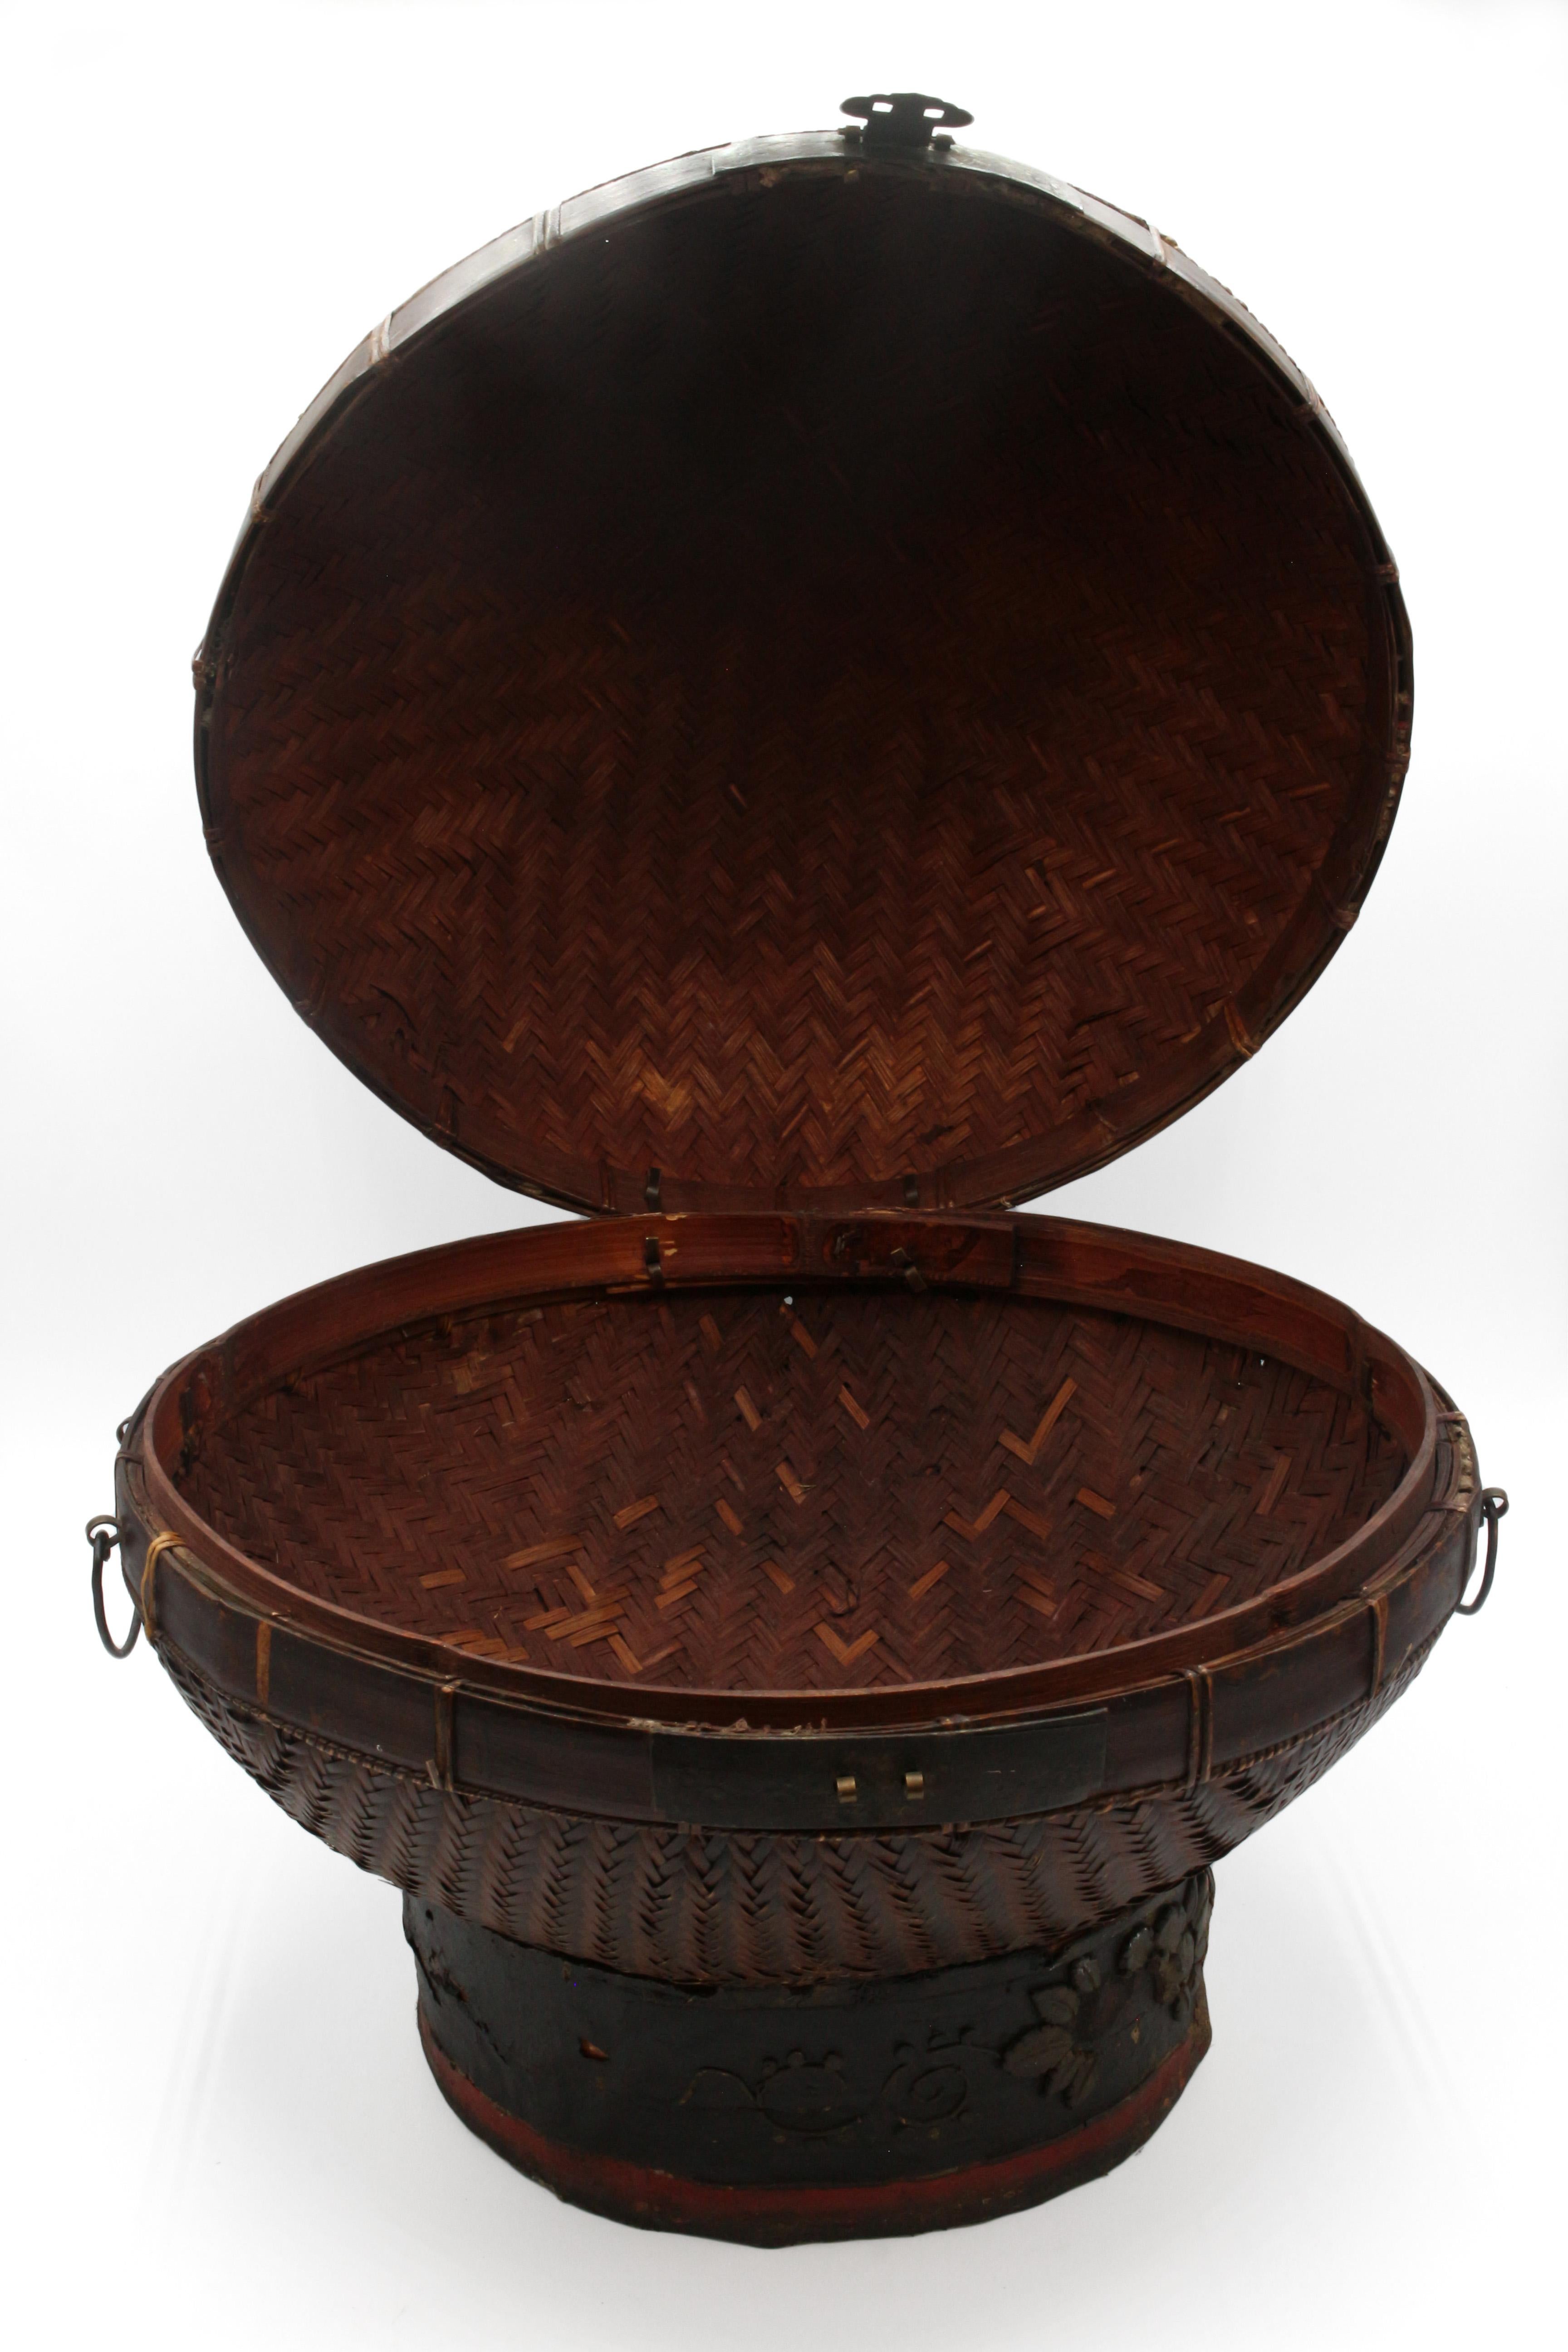 circa 1870s Chinese wedding ceremonial hat box, Zhijang Province. Woven rattan & bamboo with brass hardware. The pedestal base has lost some of the molded floral decoration. Note the double happiness symbol woven into the design - ideal as a wedding